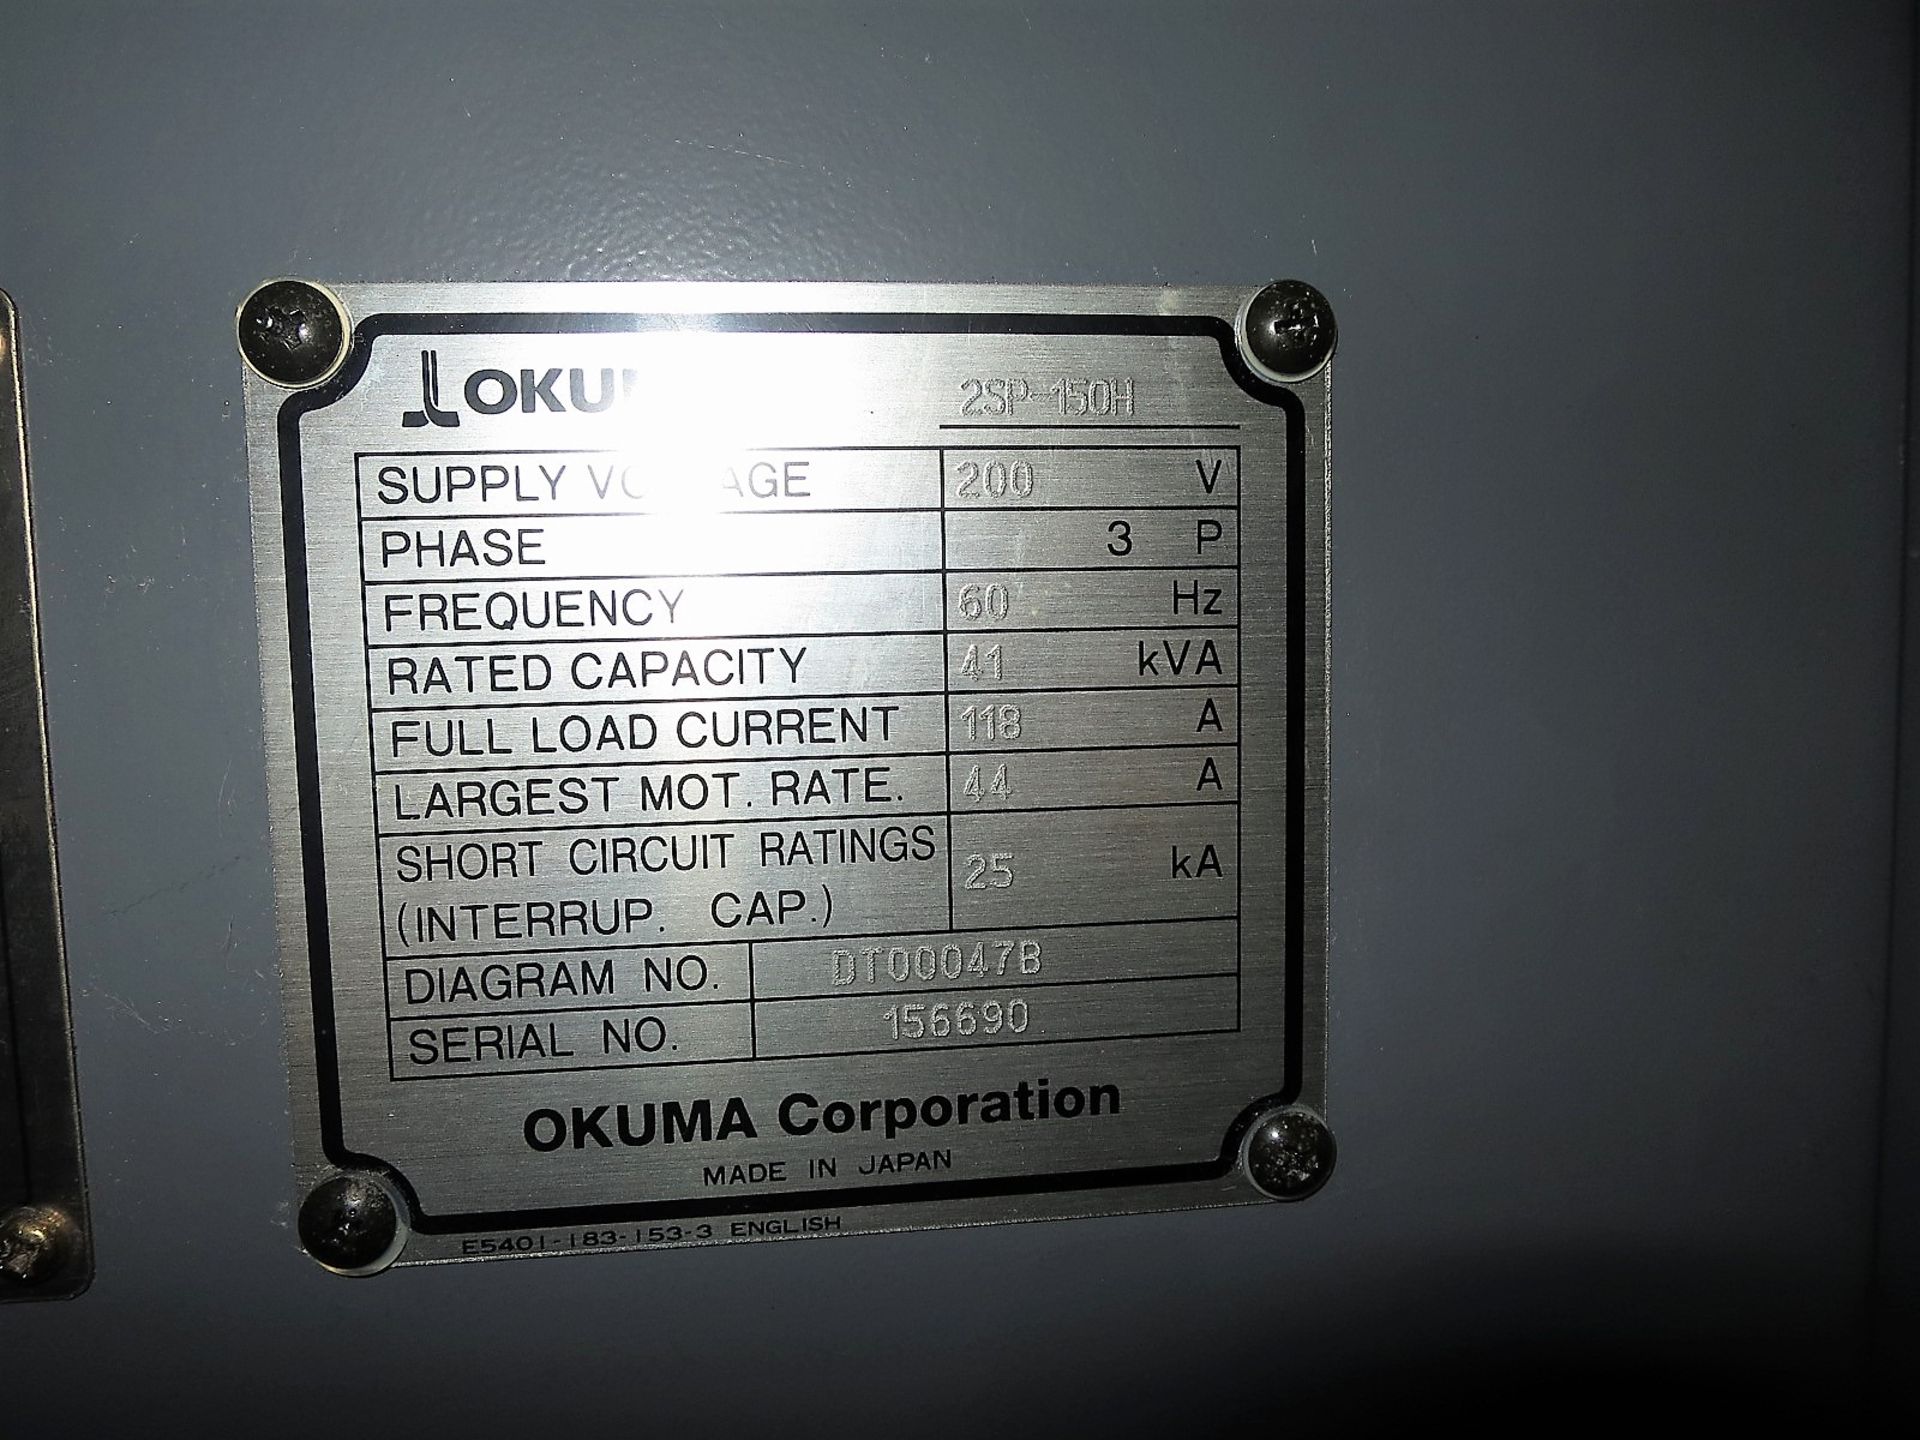 Okuma 2SP-150HM Twin Spindle 3-Axis Turning Center w/Live Milling, S/N 2SP-150HM, New 2011 - Image 12 of 12